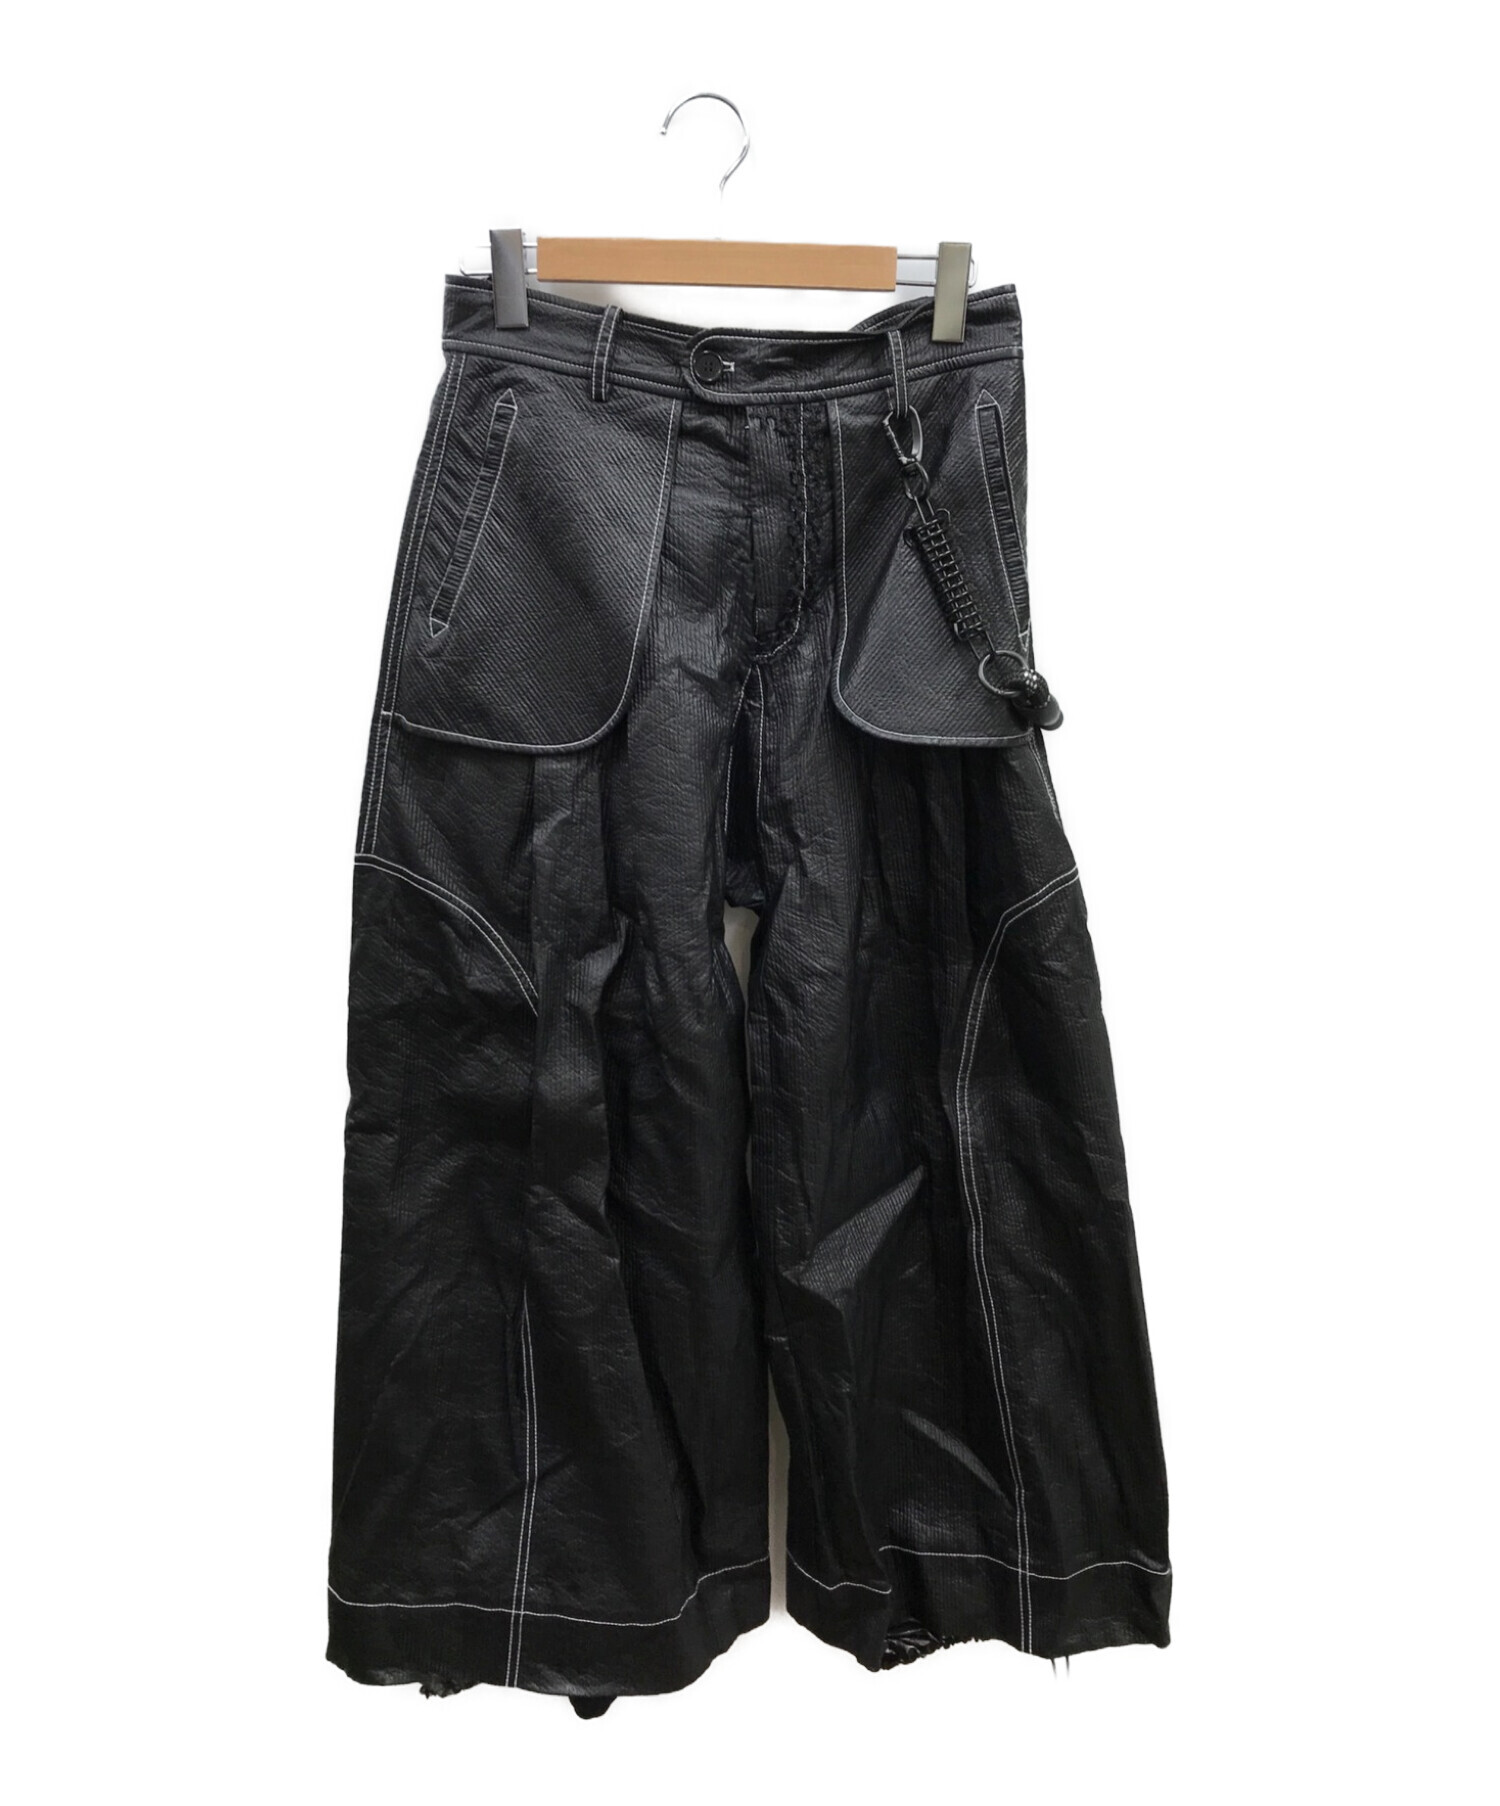 NUTEMPEROR/ナットエンペラーWIDE PU LEATHER PANTS-